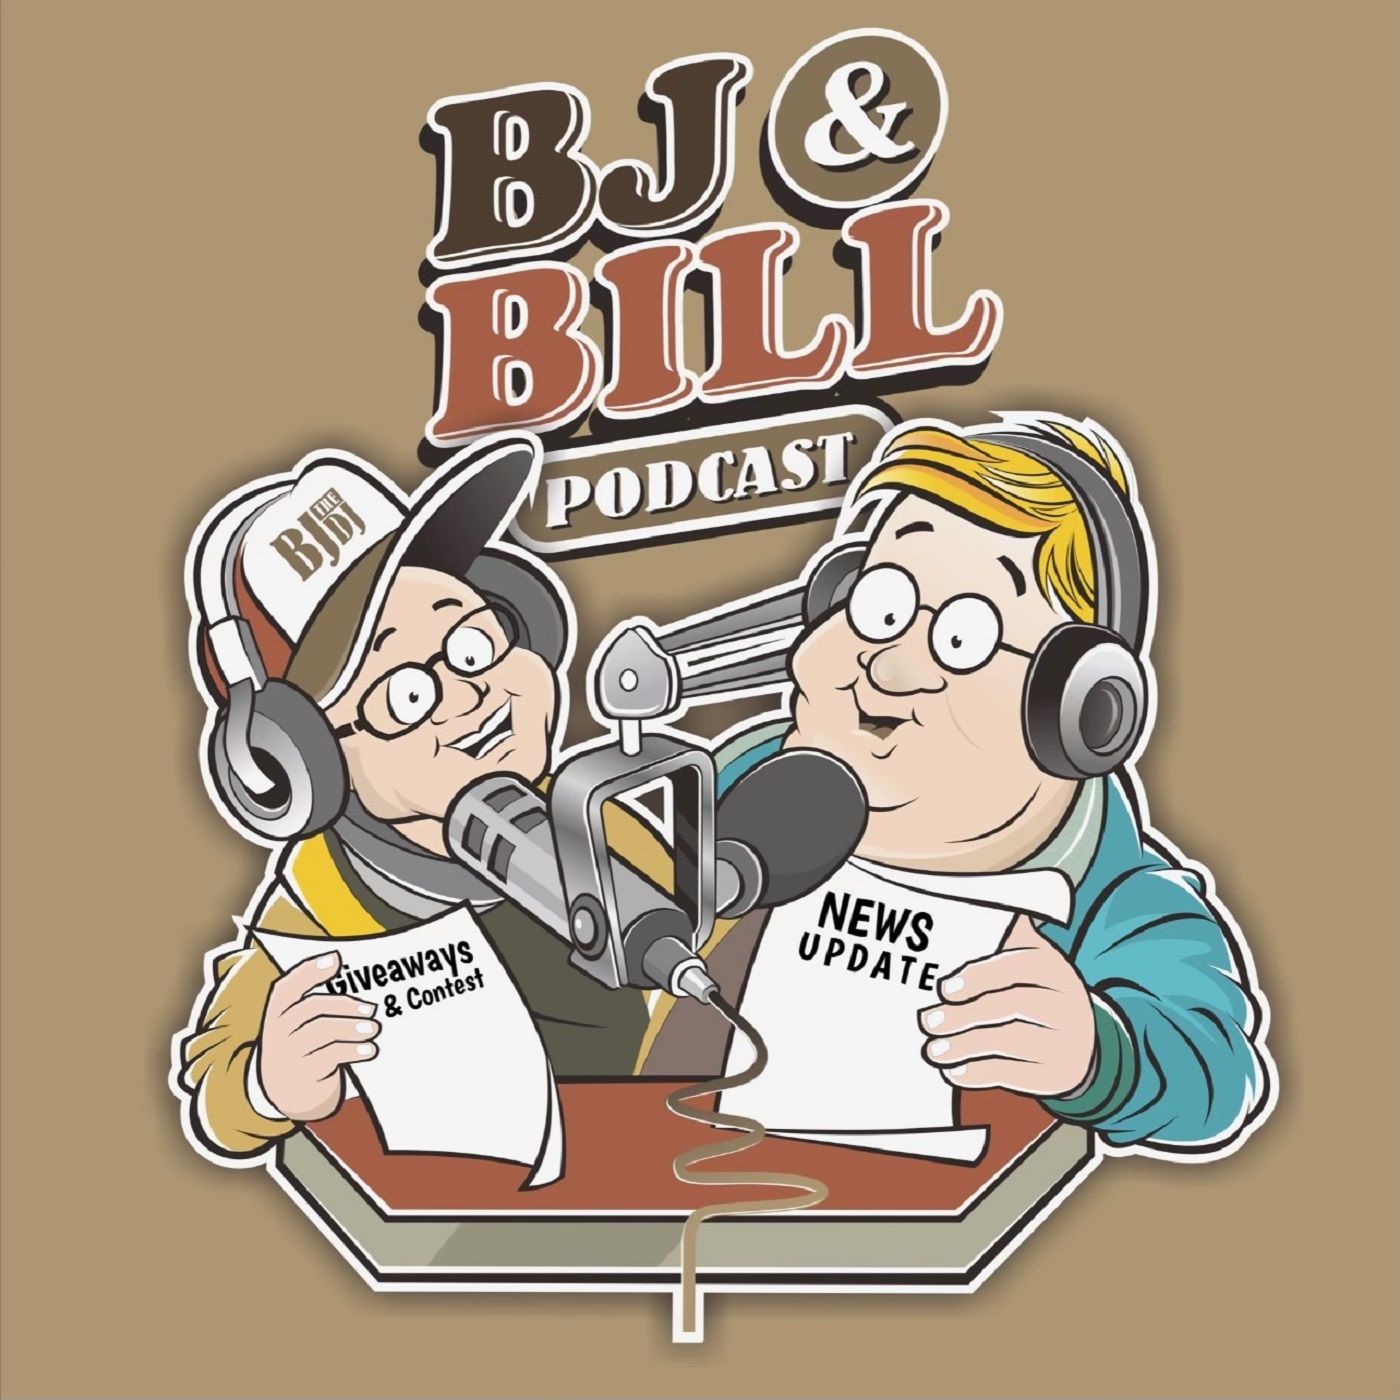 BJ and Bill The Podcast EP - 16